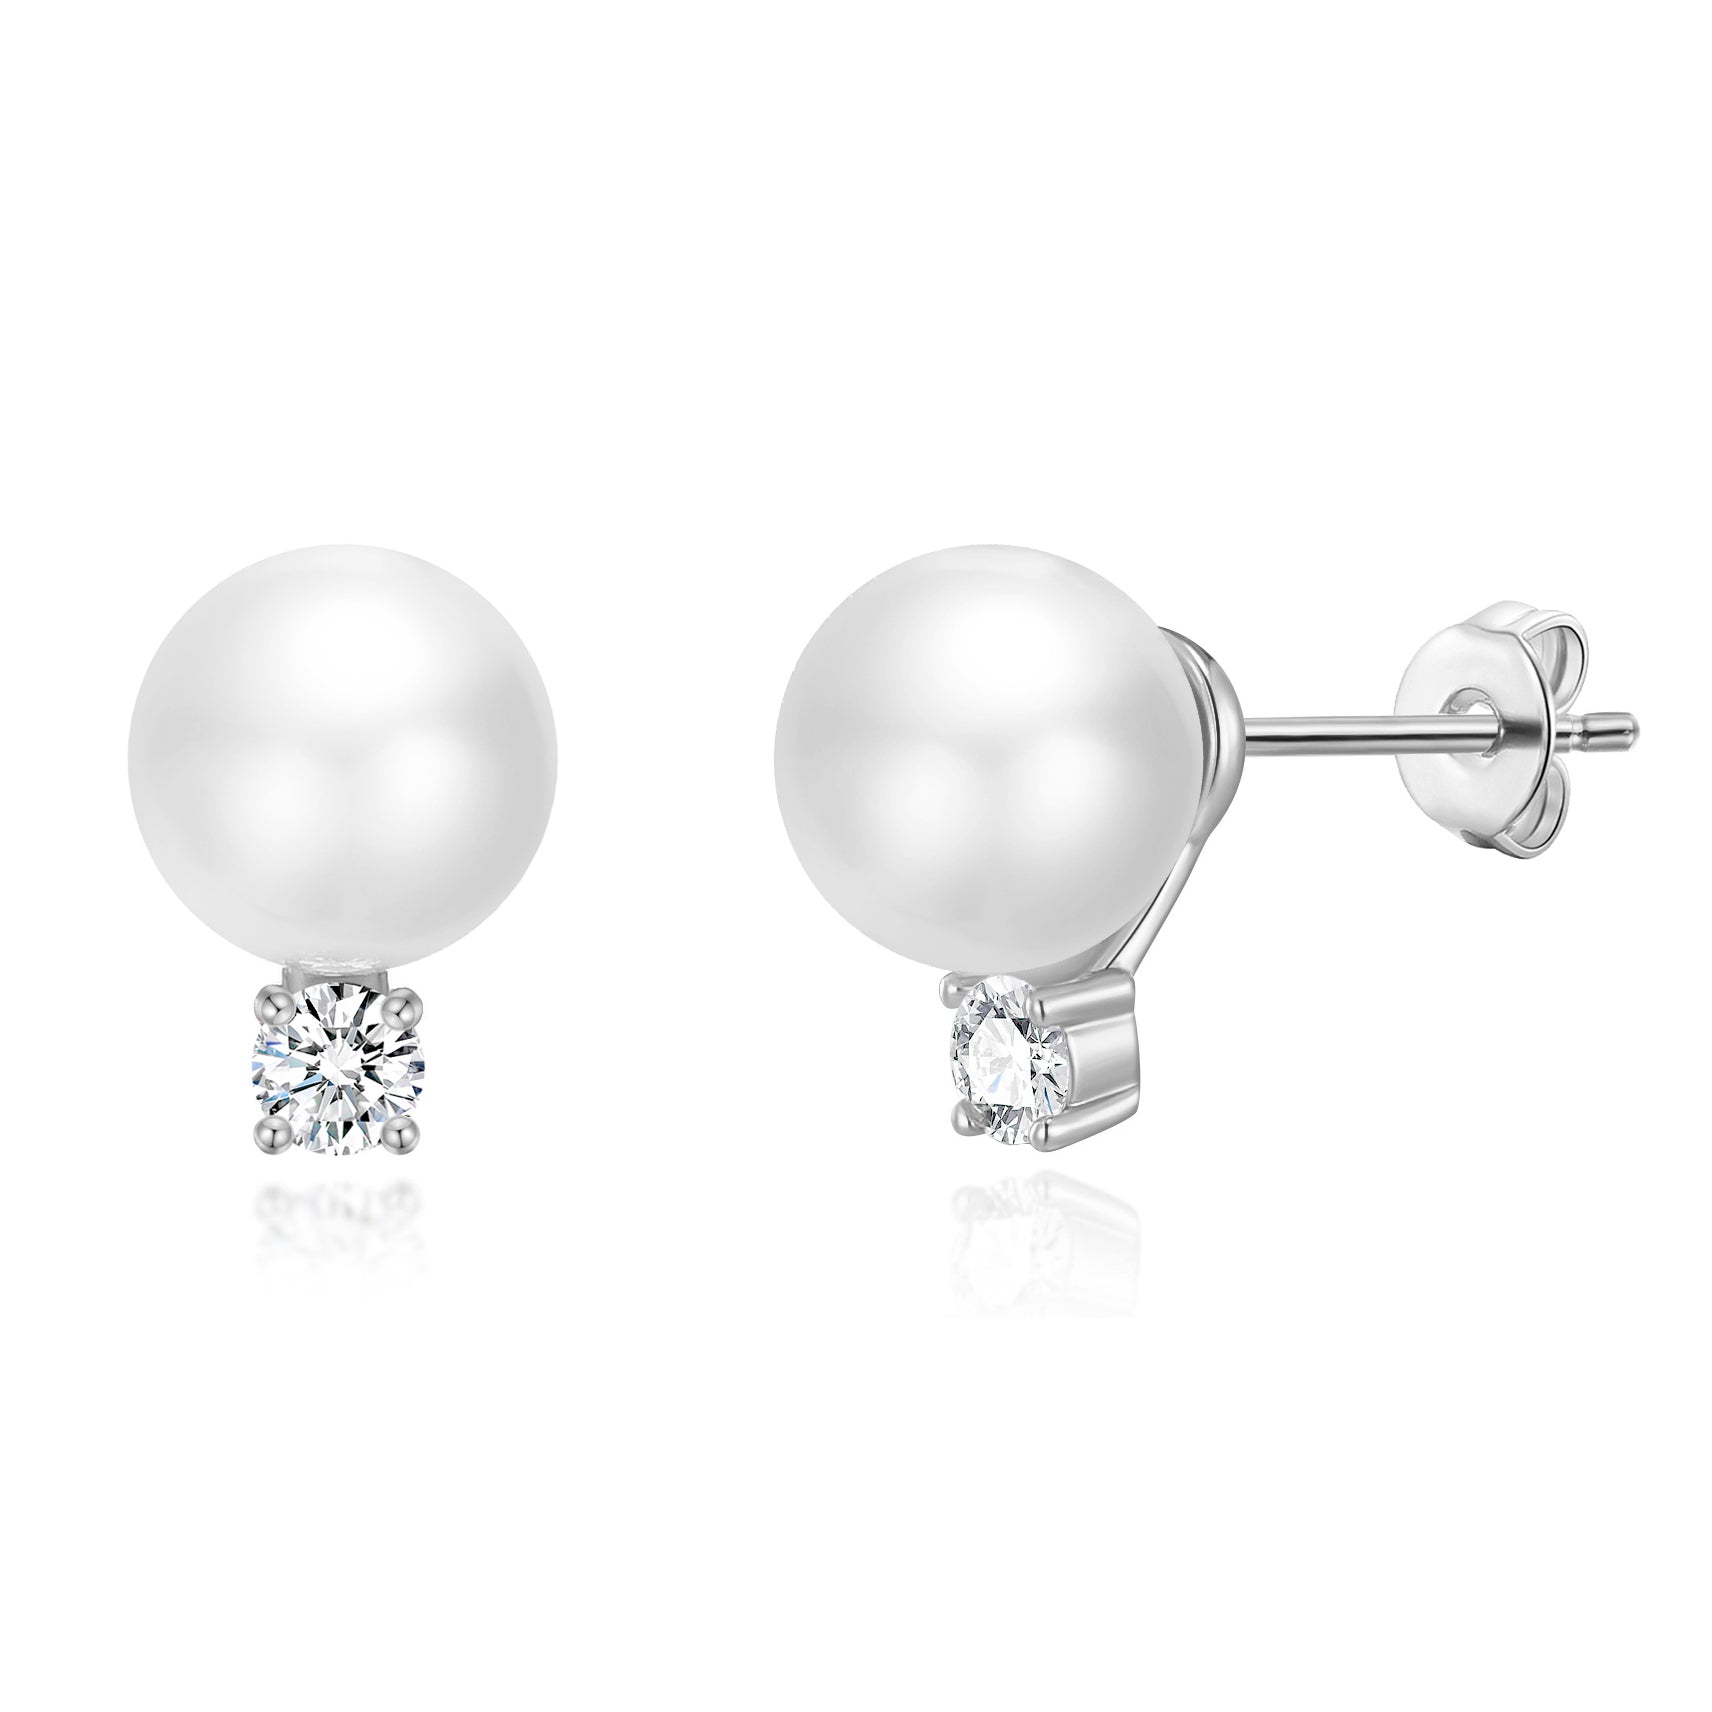 Silver Plated Round Shell Pearl Earrings Created with Zircondia® Crystals by Philip Jones Jewellery